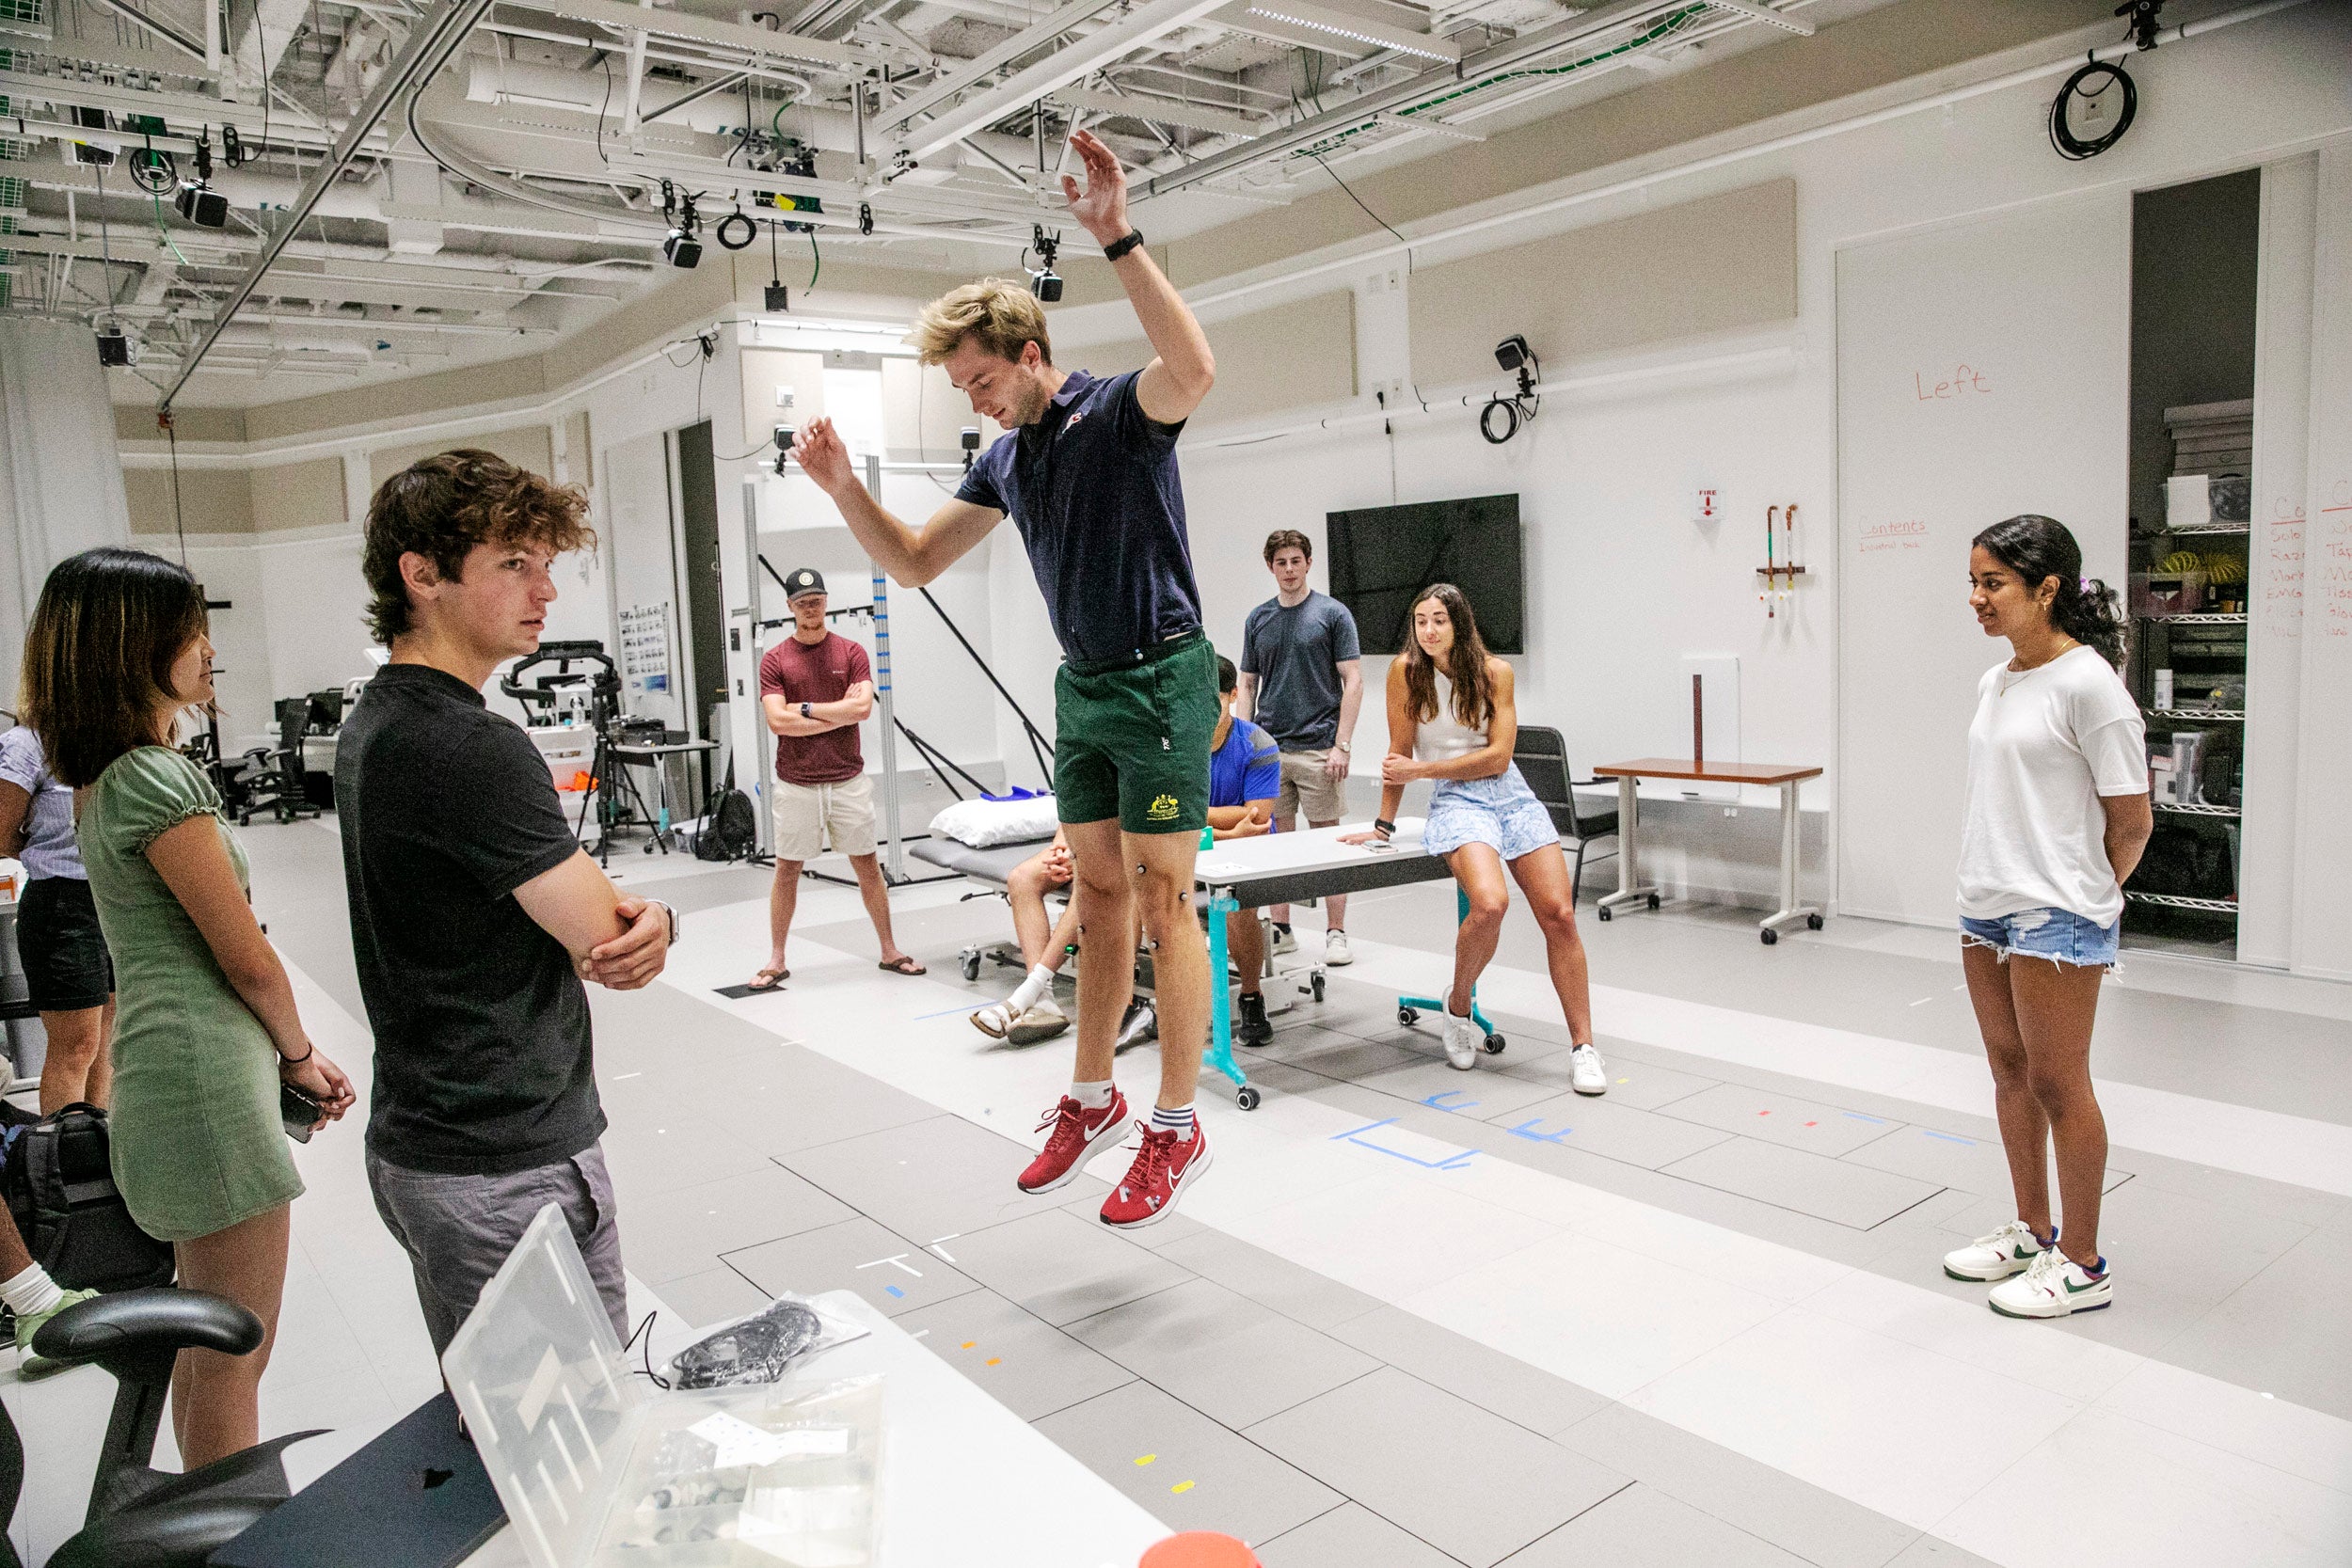 Benjamin Zeisberg ’23 jumps and generates a readout of his muscle movement and energy expenditure.